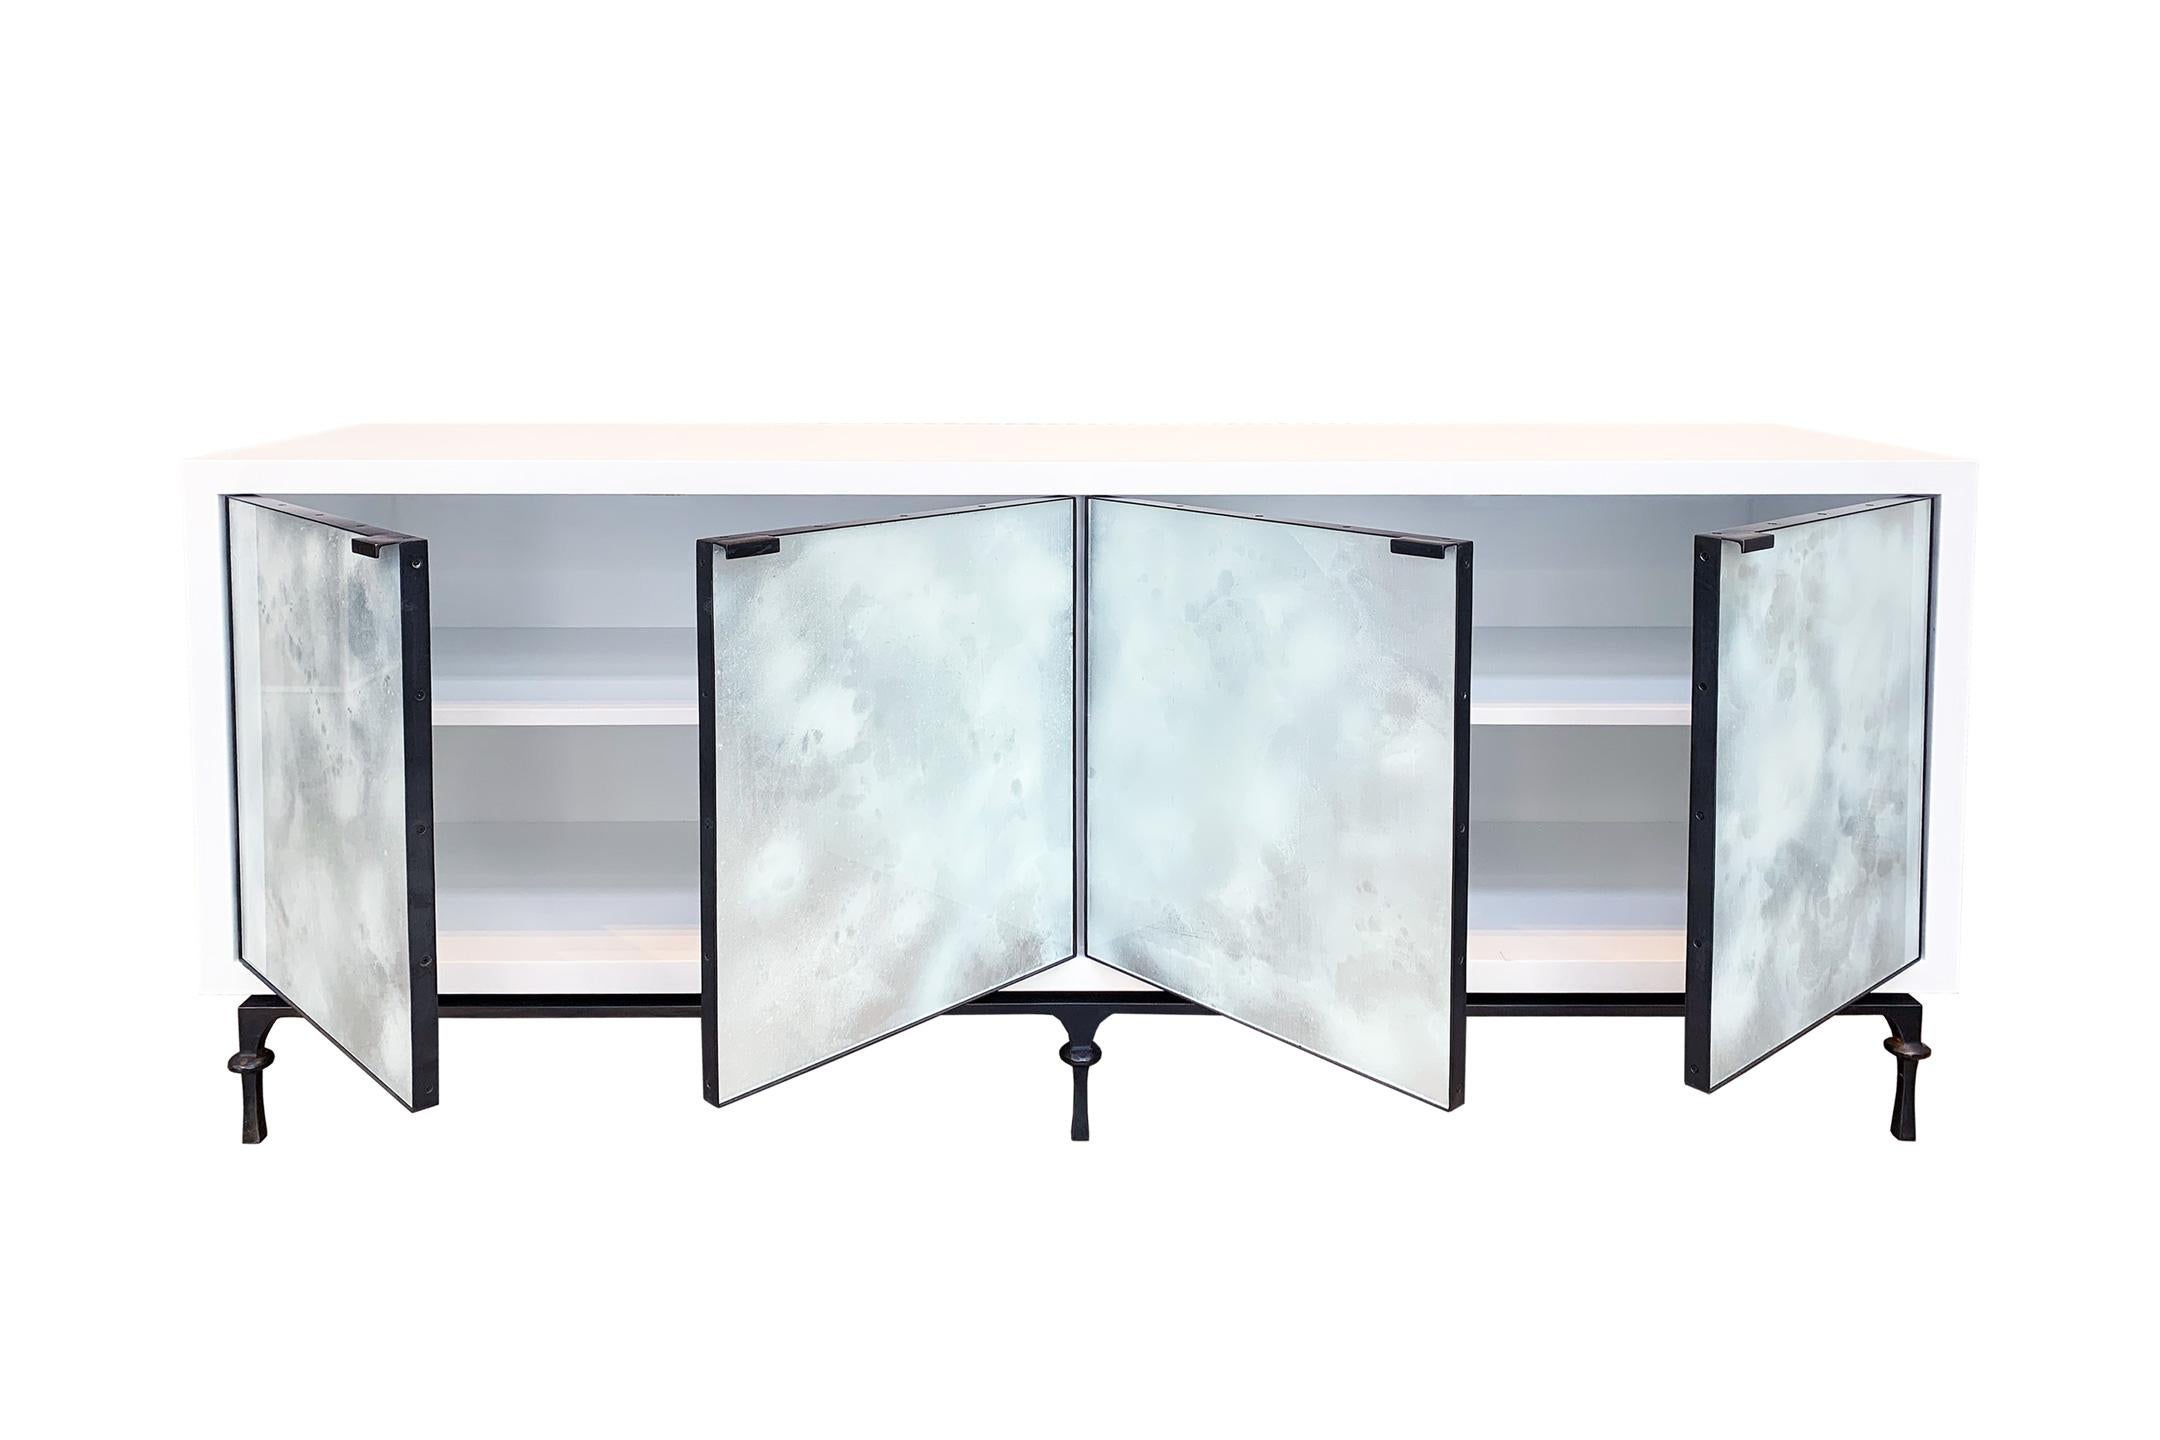 The Mystic buffet or credenza by Ercole home has a 4-door front, with painted white wood finish in matte sheen.
Hand painted glass panels in Oro Bianco are on the door surface.
The decorative hand forged Meta base in natural steel metal